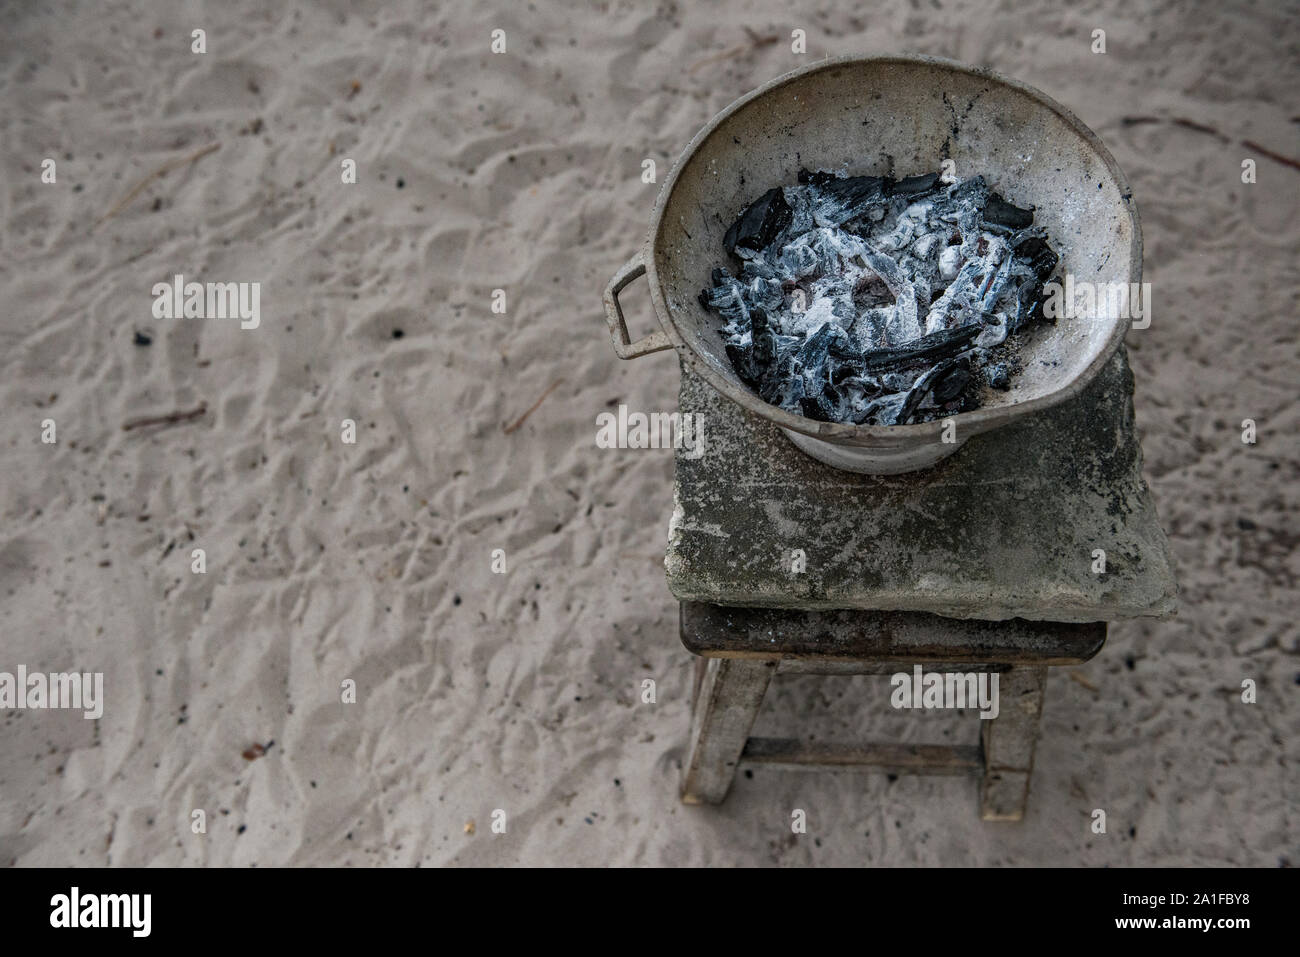 Old pan filled with burnt charcoal over wood bench on sandy floor Stock Photo